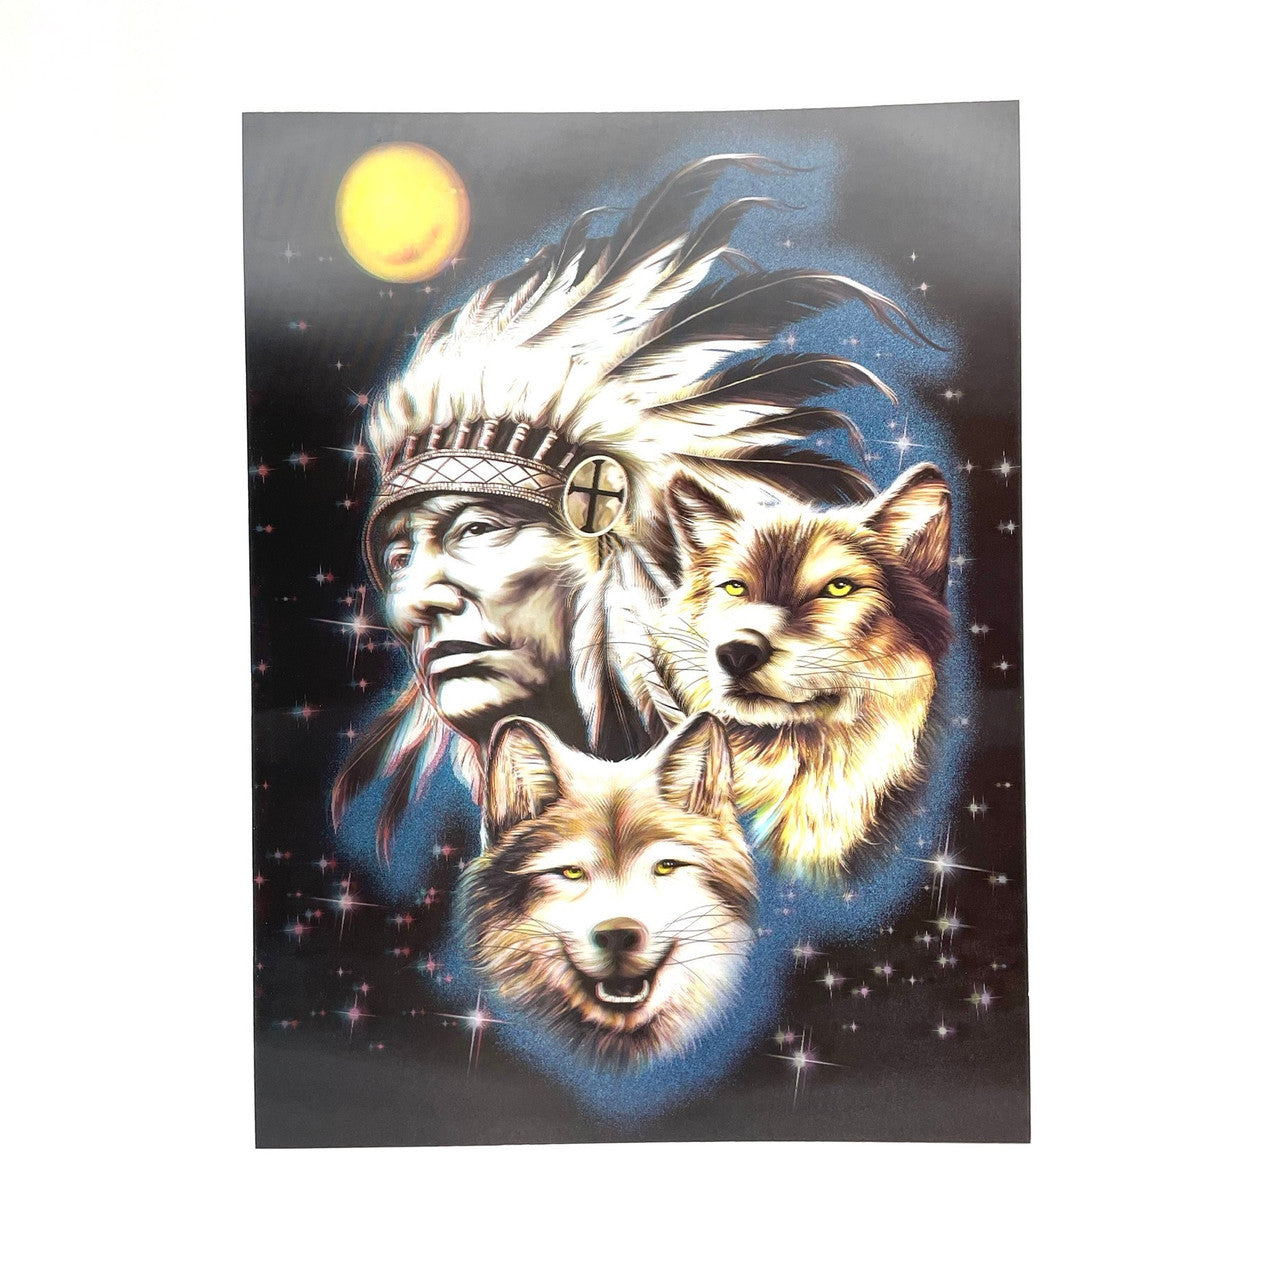 A native man in a ceremonial headdress stares off wistfully and is surrounded by two wolves, stars, and a full moon.